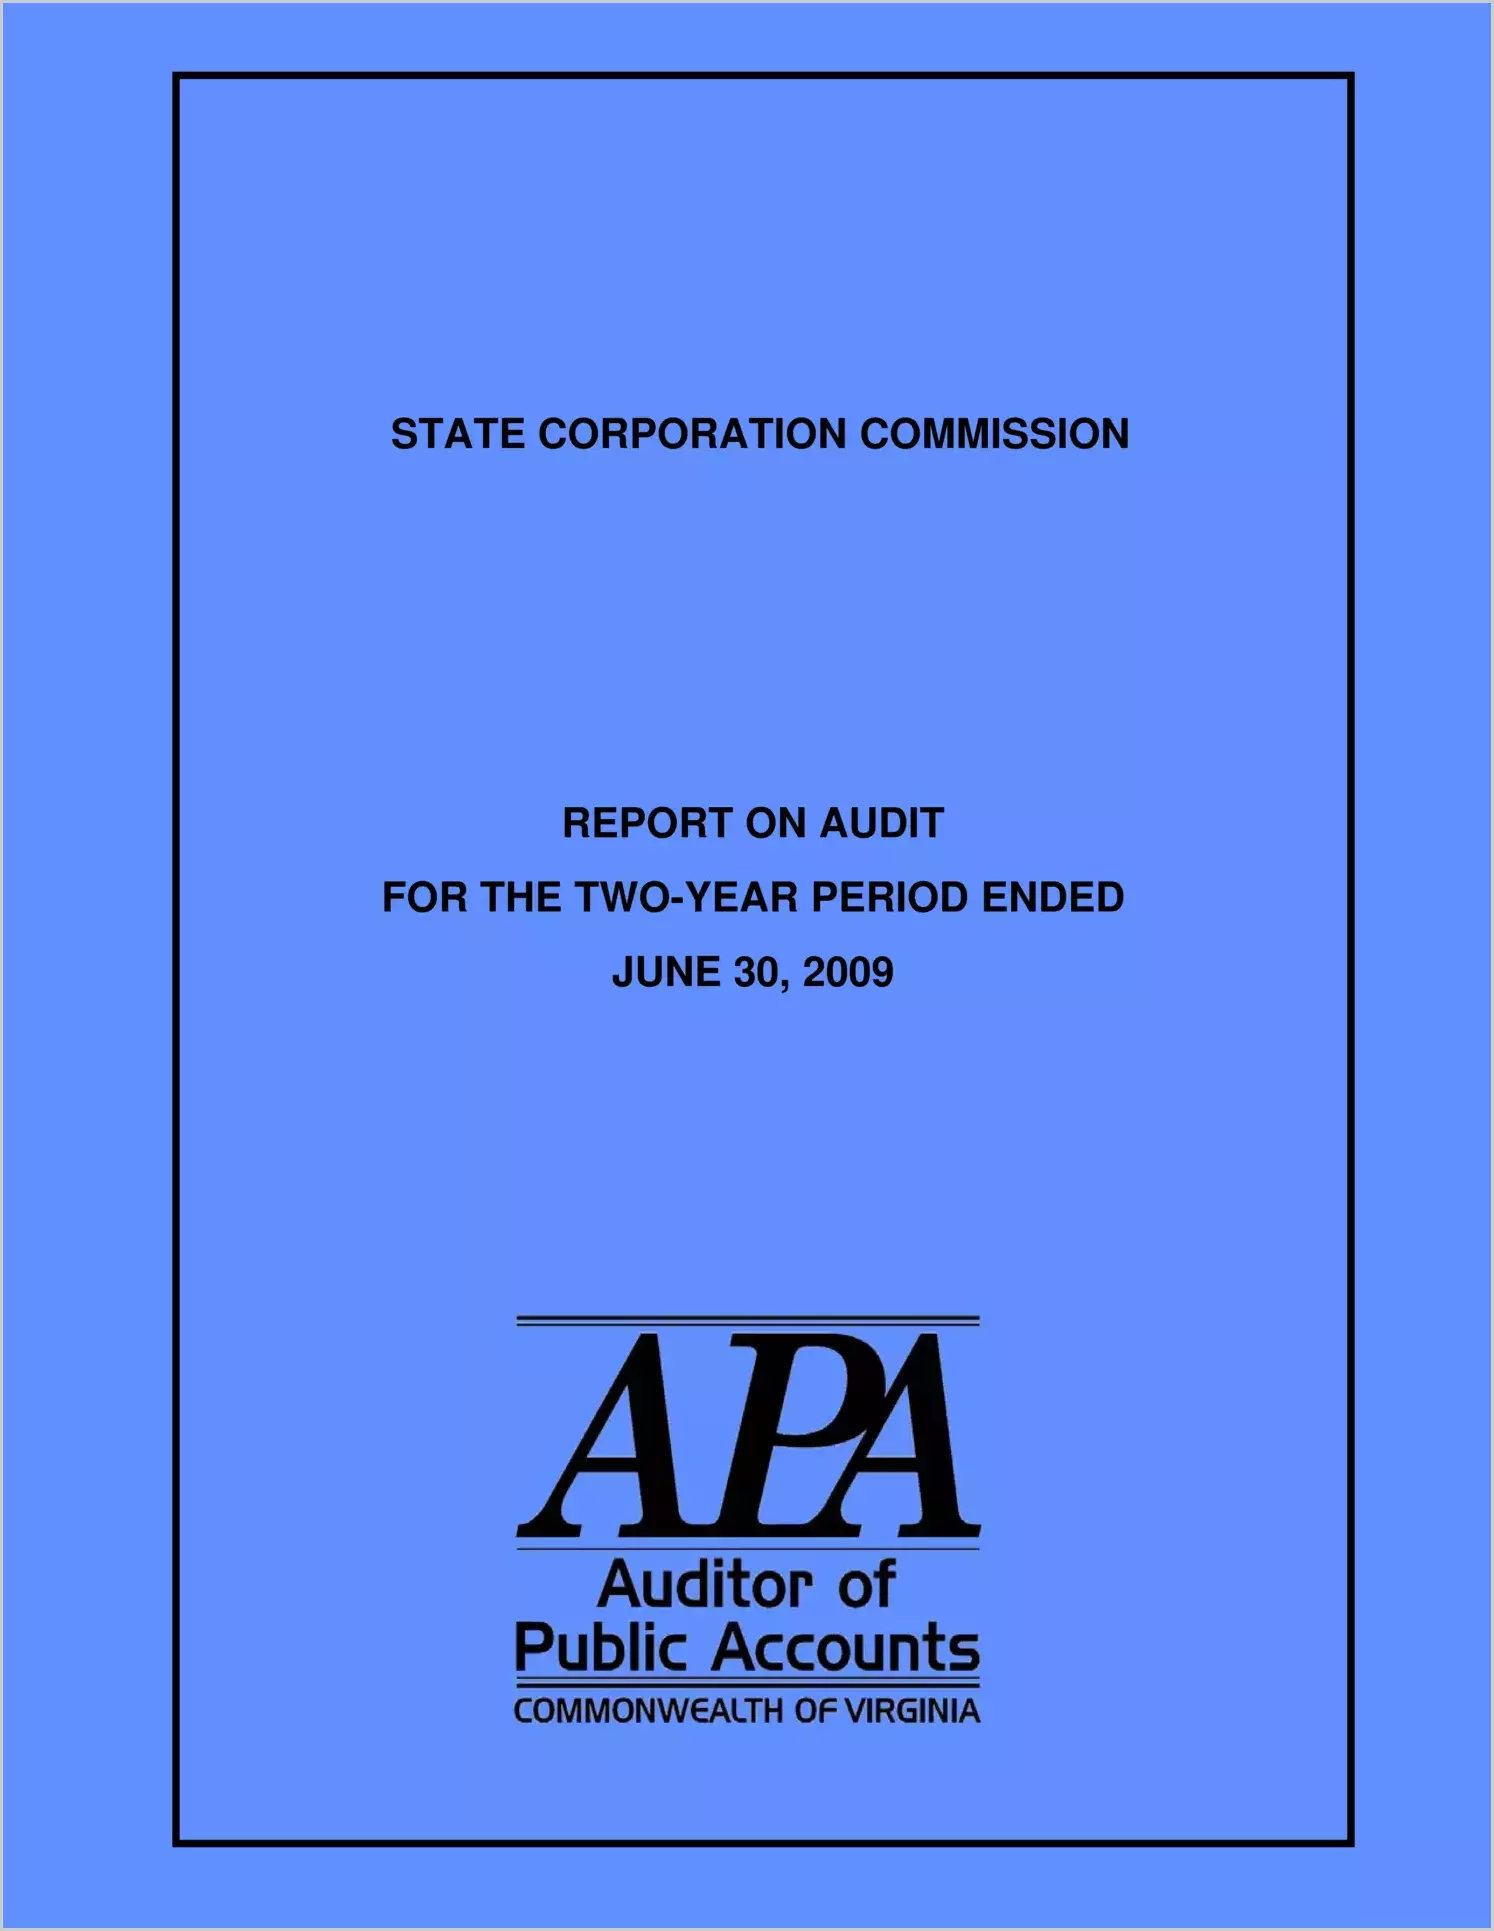 State Corporation Commission for the two-year period ended June 30, 2009